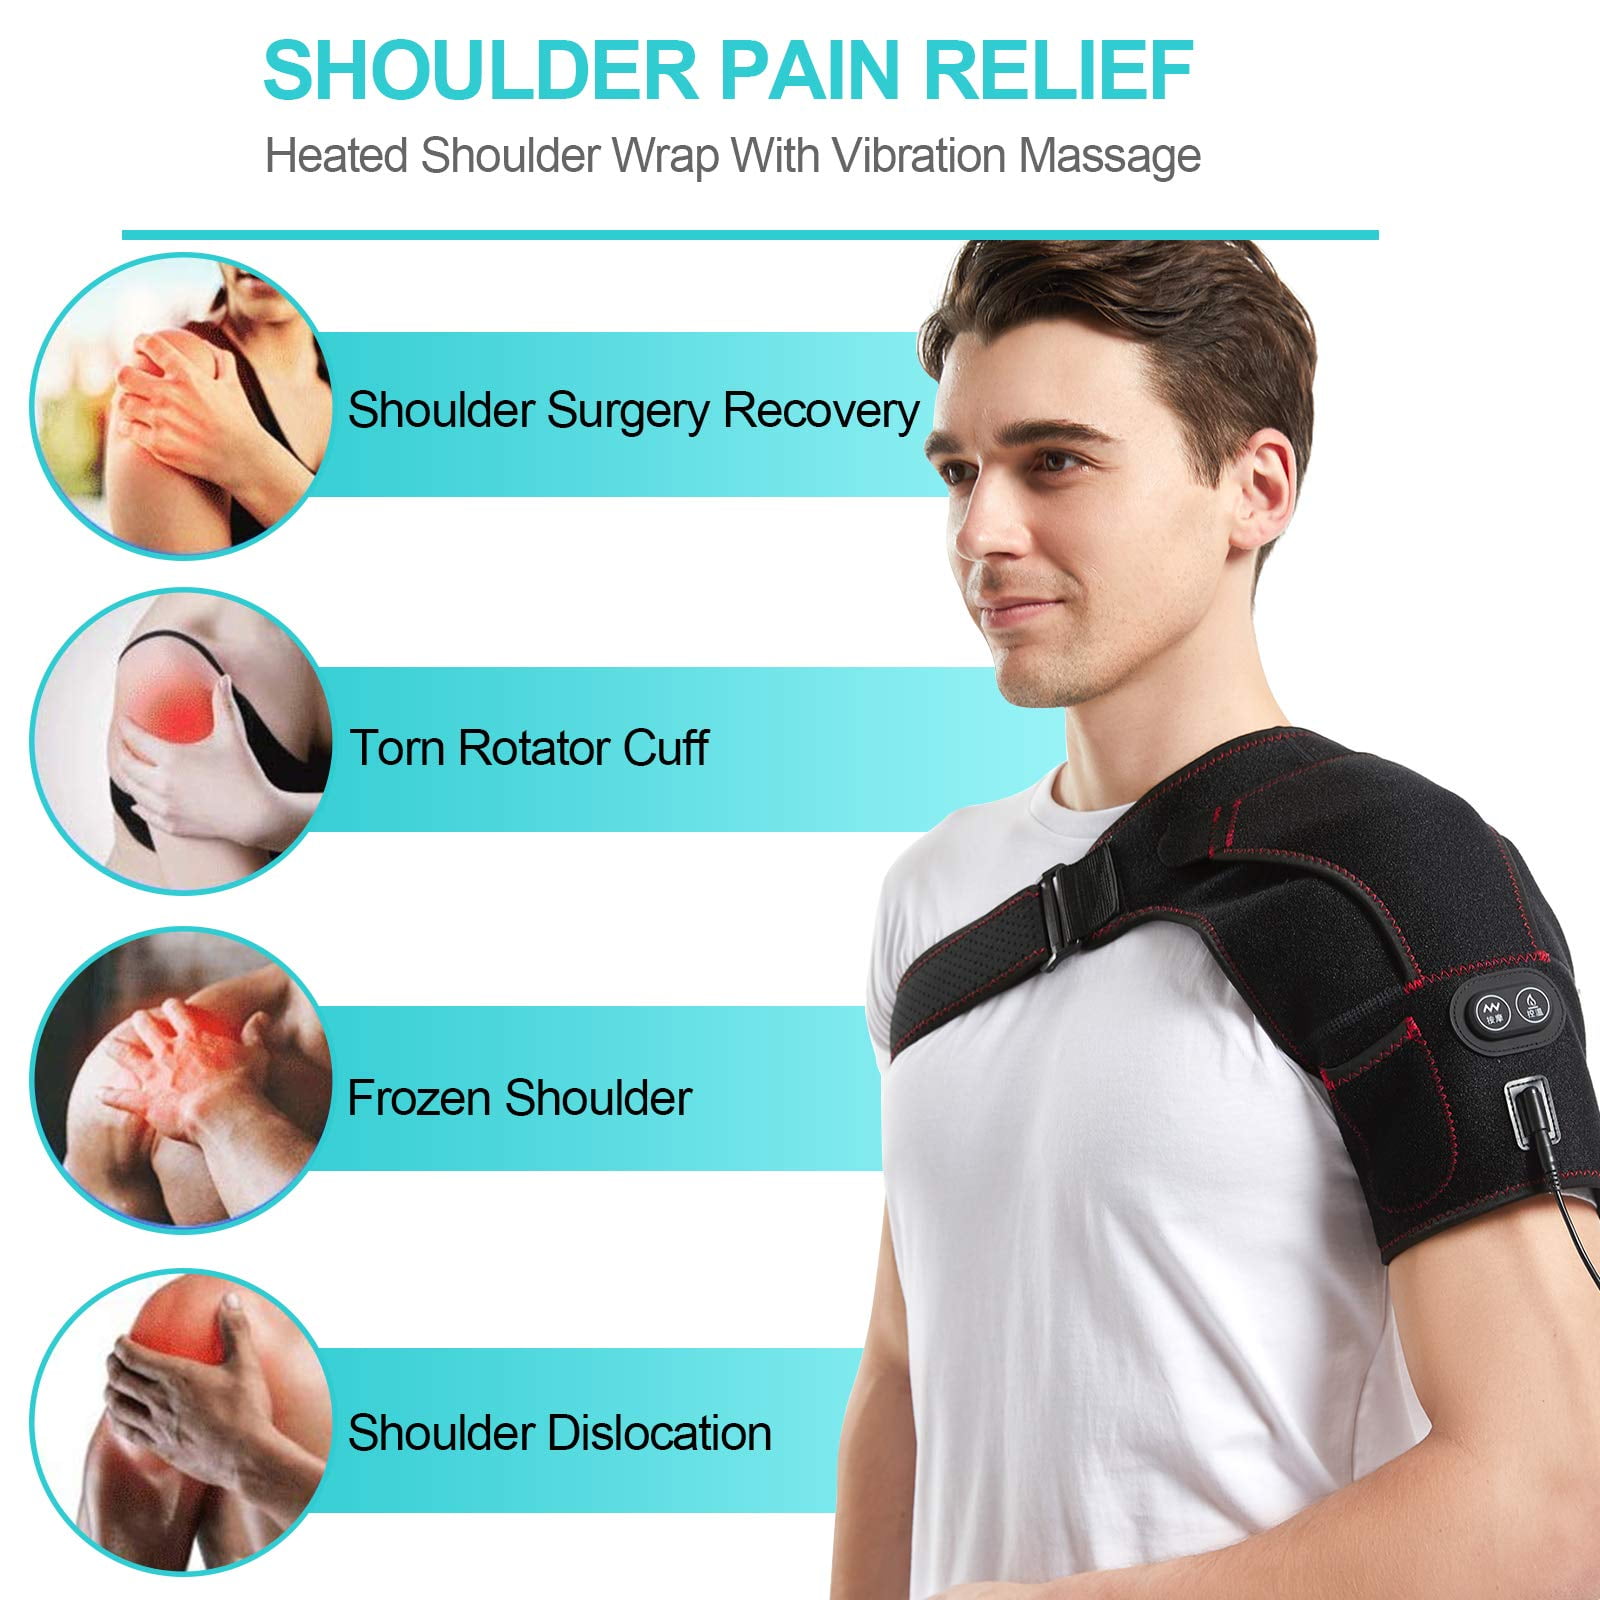 sticro Shoulder Heating Pad Massager for Pain Relief Vibration Massage  Heated Wrap Braces for Left Right Frozen Shoulder Rotator Cuff Injury  Arthritis Decent Gift for Men Woman - S/M/L Small/Medium/Large